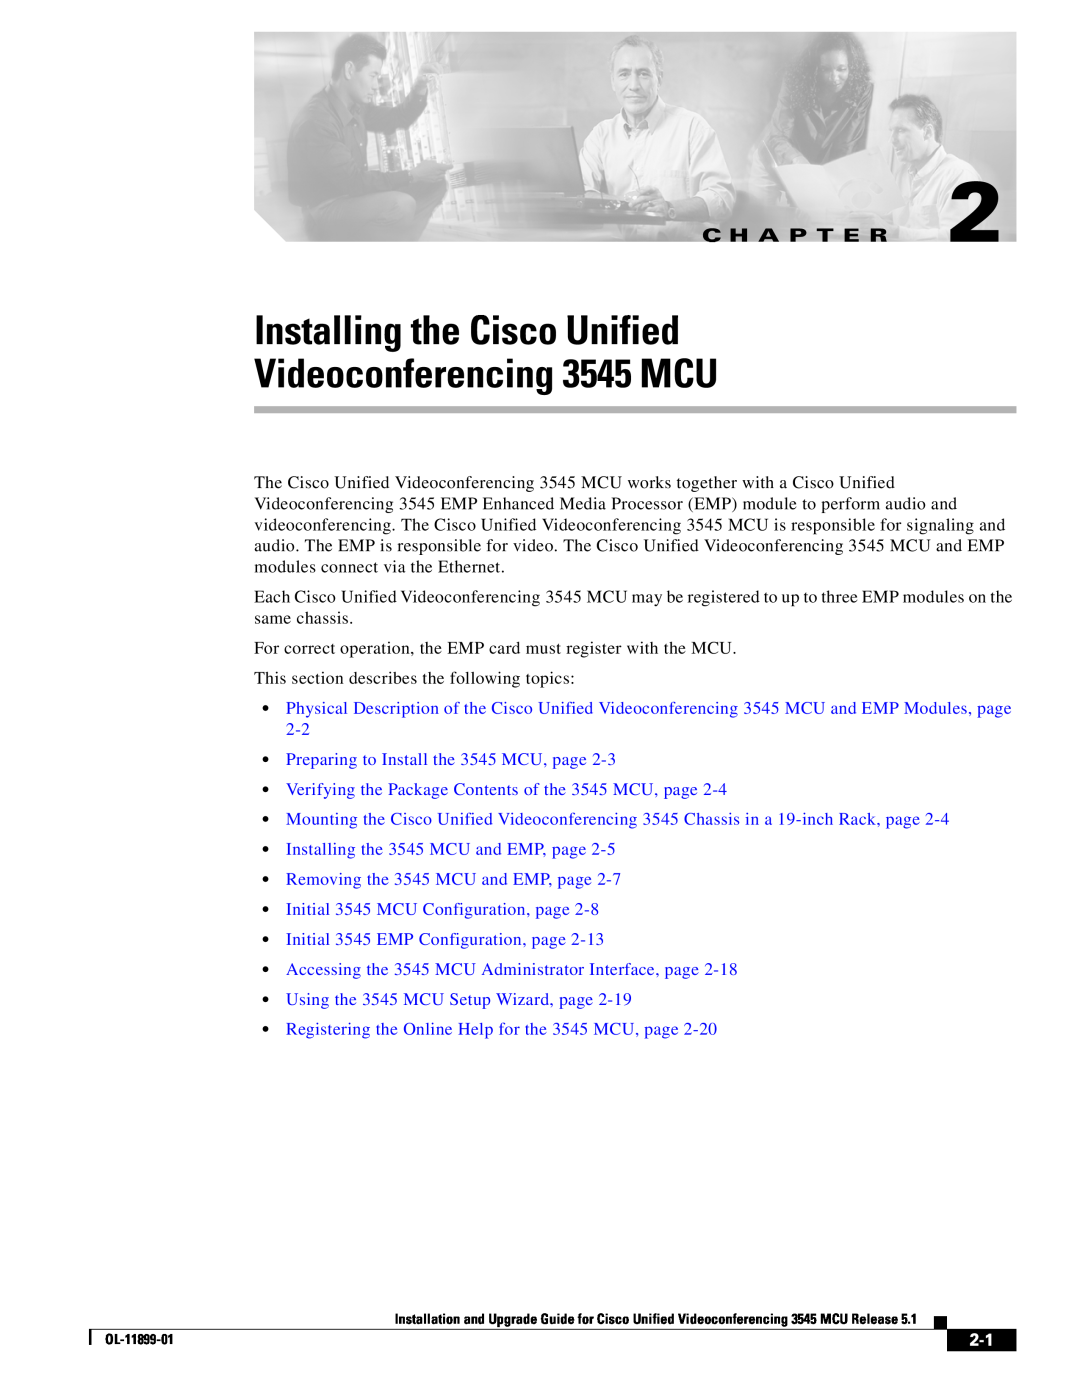 Cisco Systems manual Installing the Cisco Unified Videoconferencing 3545 MCU, C H A P T E R 